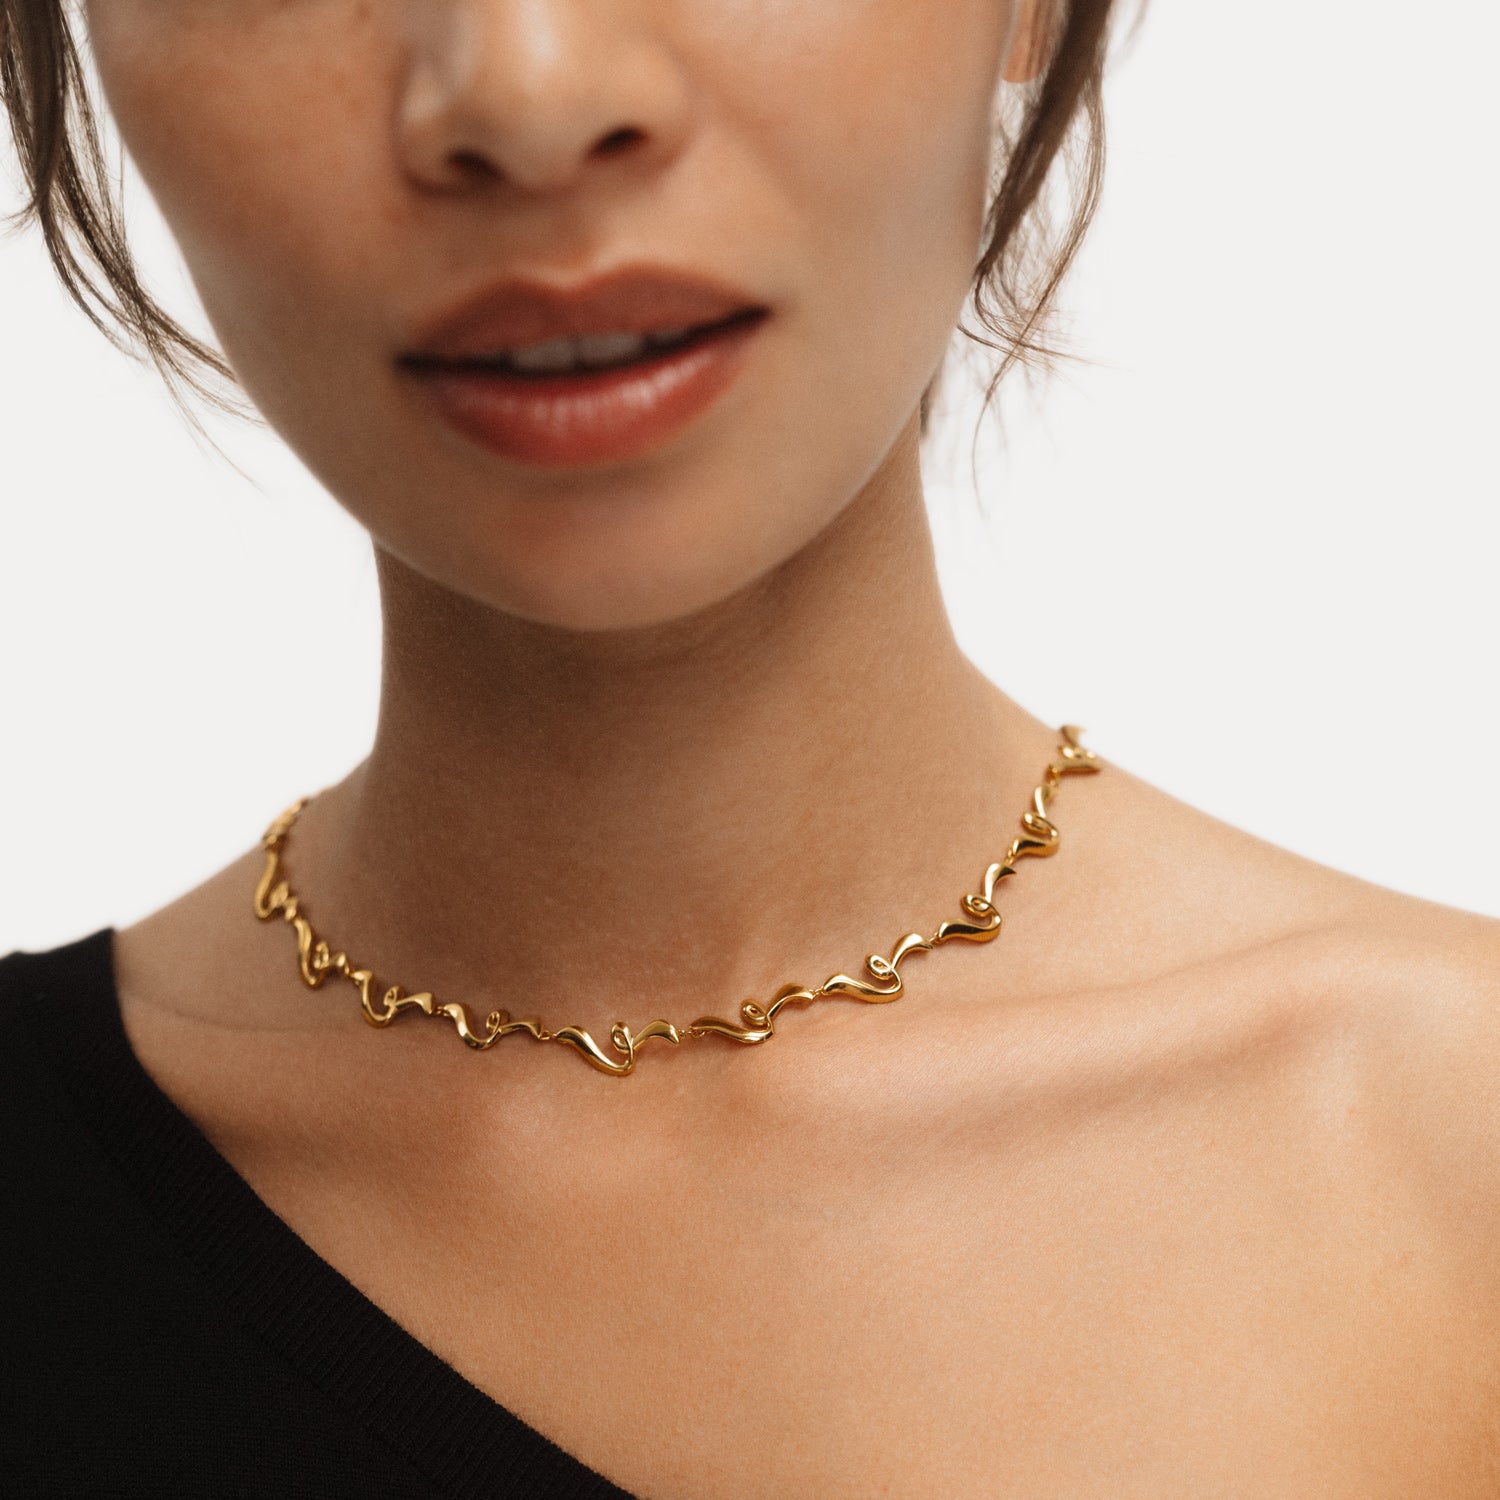 Poise Twirl Choker Necklace, recycled 18k Gold Vermeil, shown on model - VEYIA Berlin